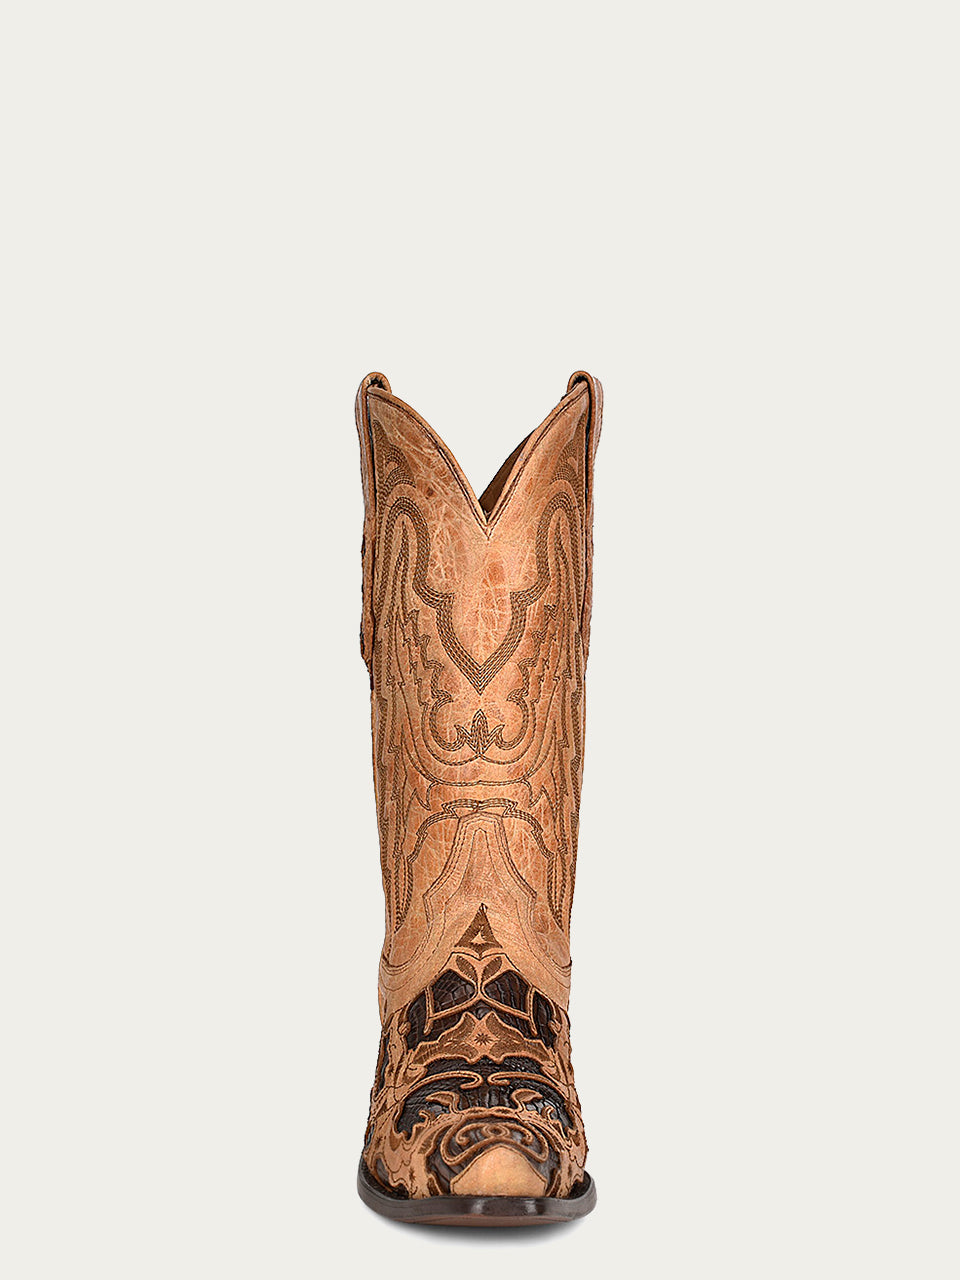 Corral Men's Chocolate Alligator Inlay Embroidered Snip Toe Cowboy Boots - Dudes Boutique